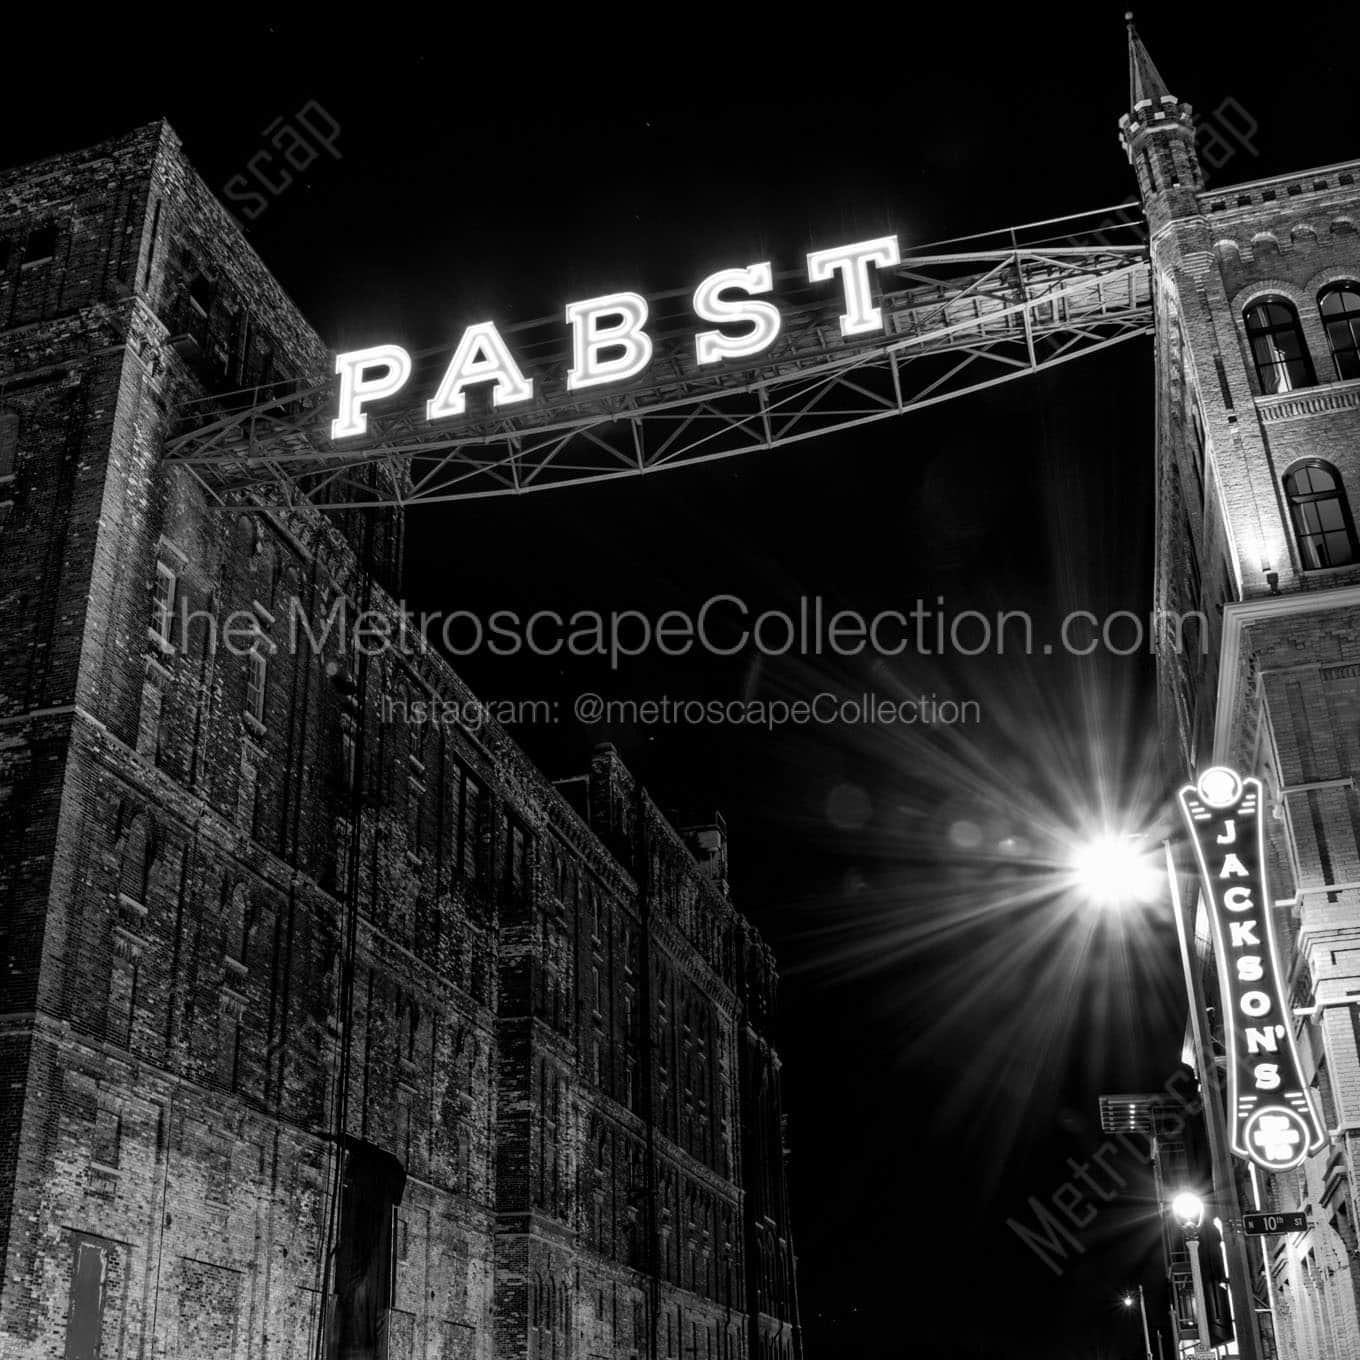 pabst brewing sign at night Black & White Office Art